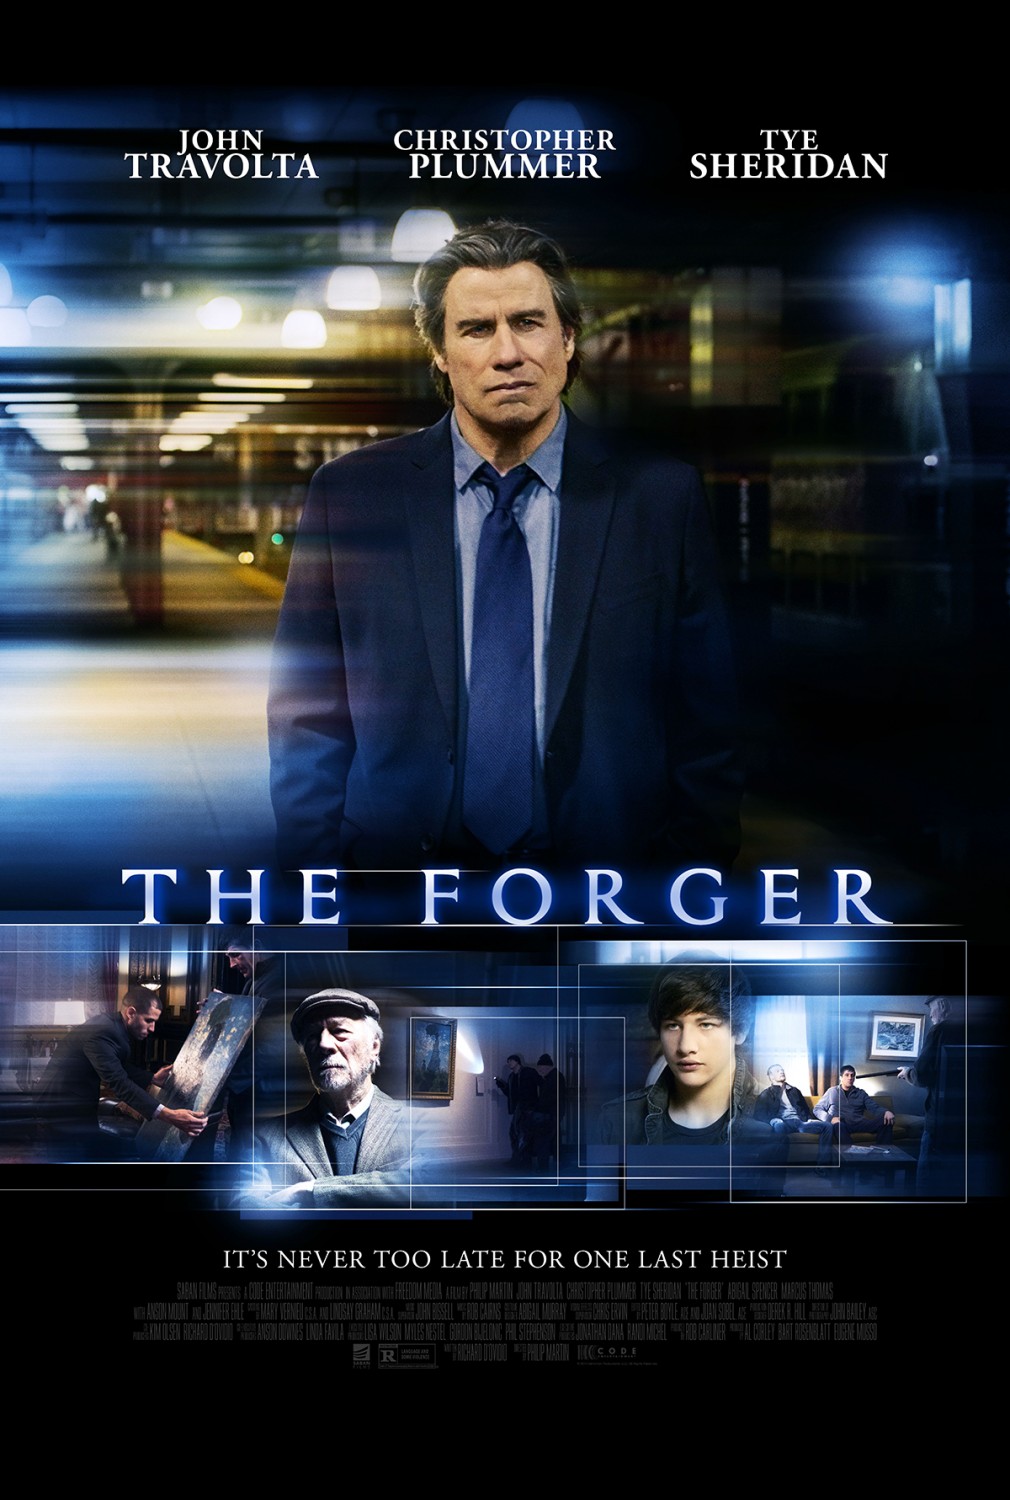 The Forger-Poster XLG-02Março2015